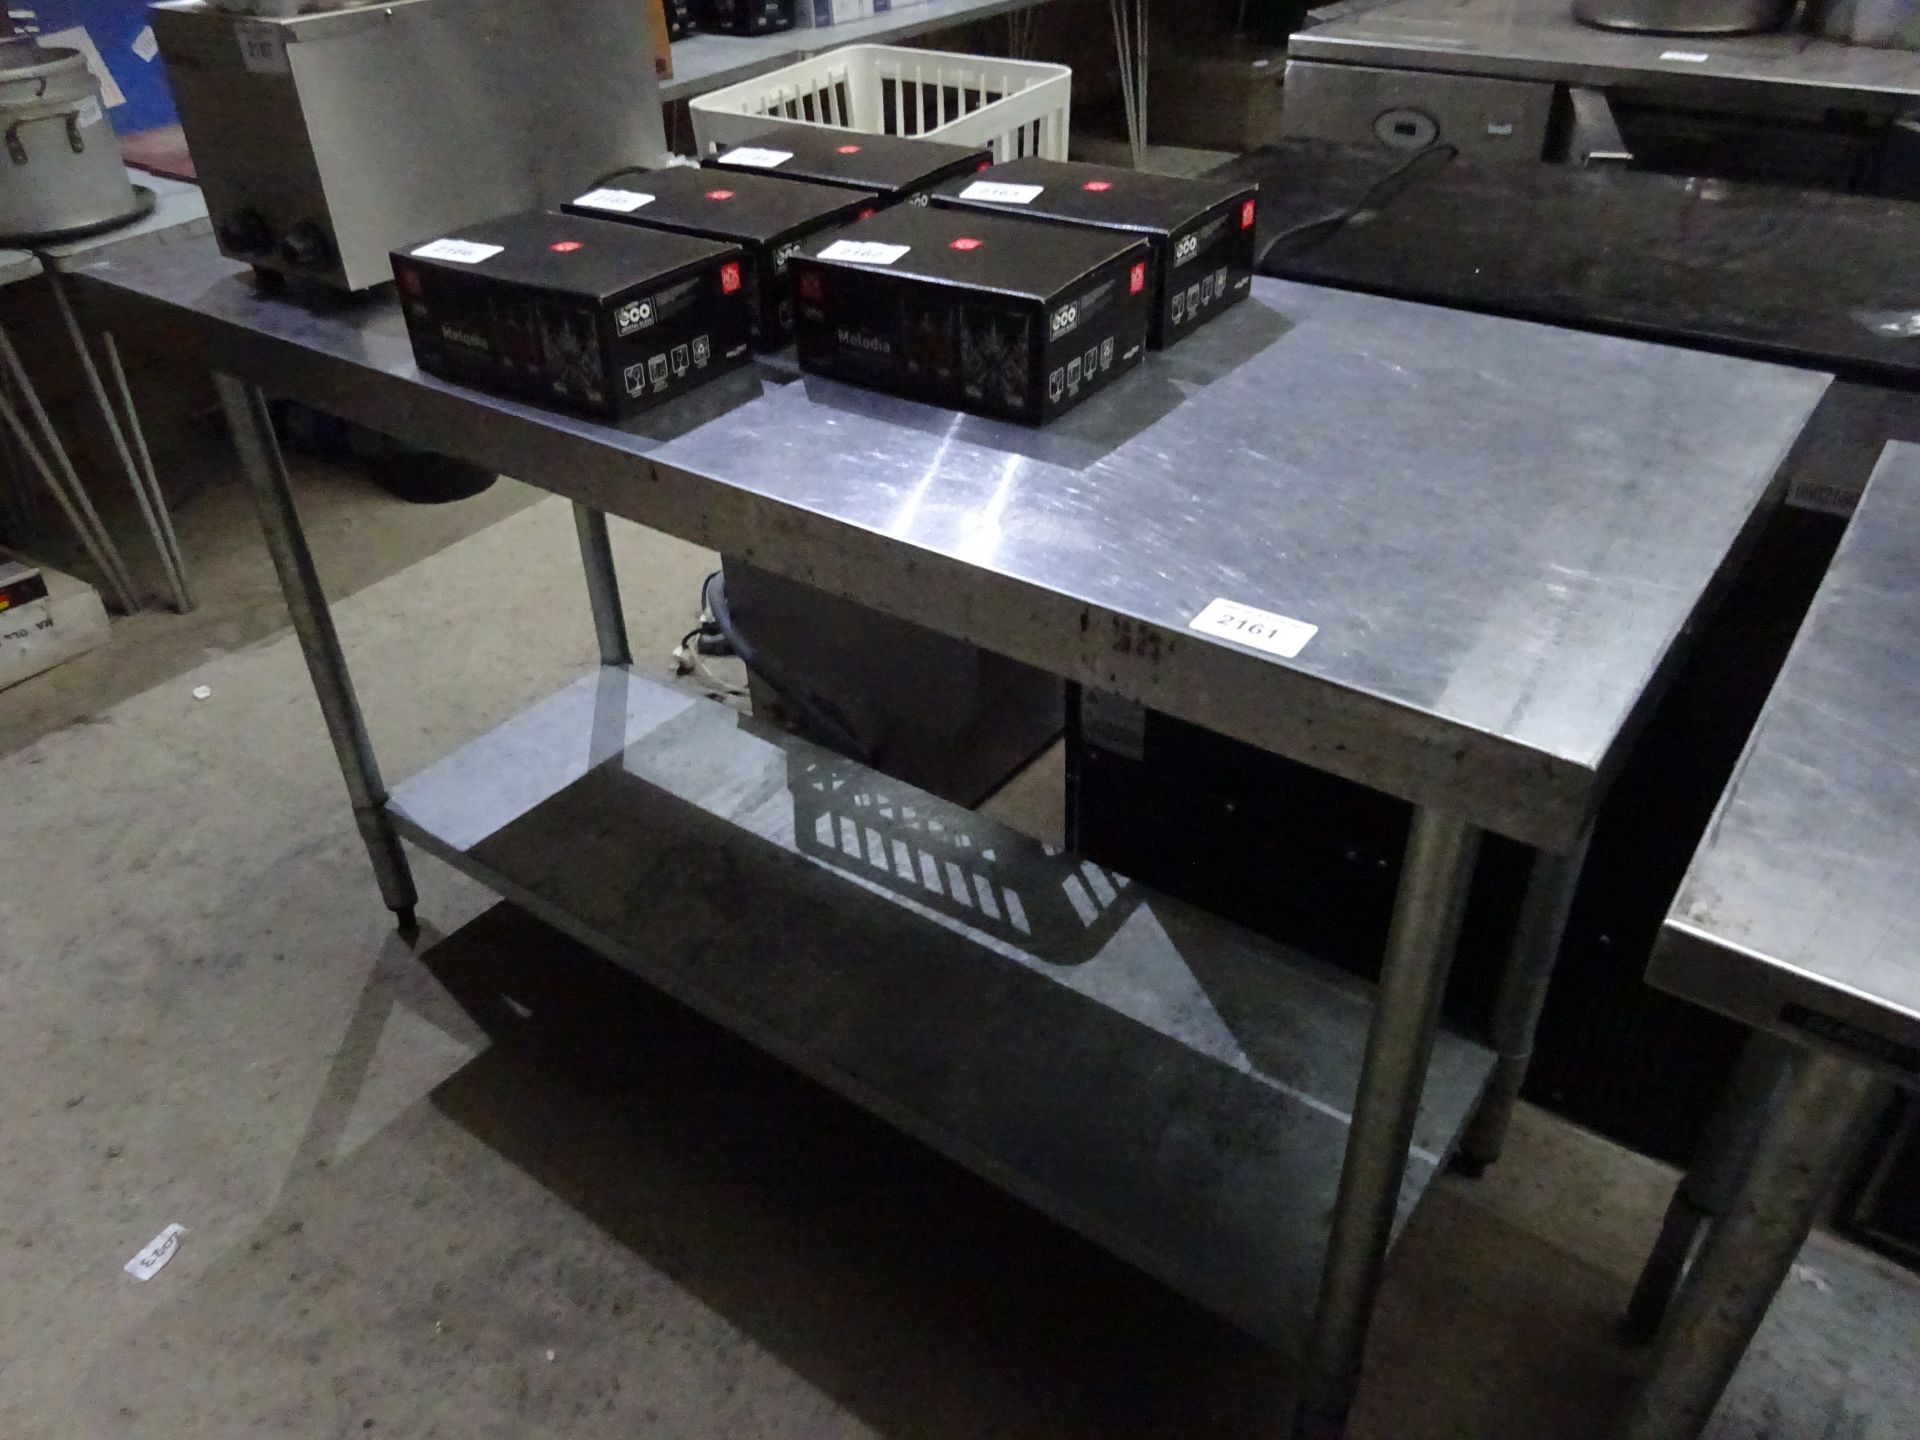 Stainless steel prep table with under shelf, 150cms.